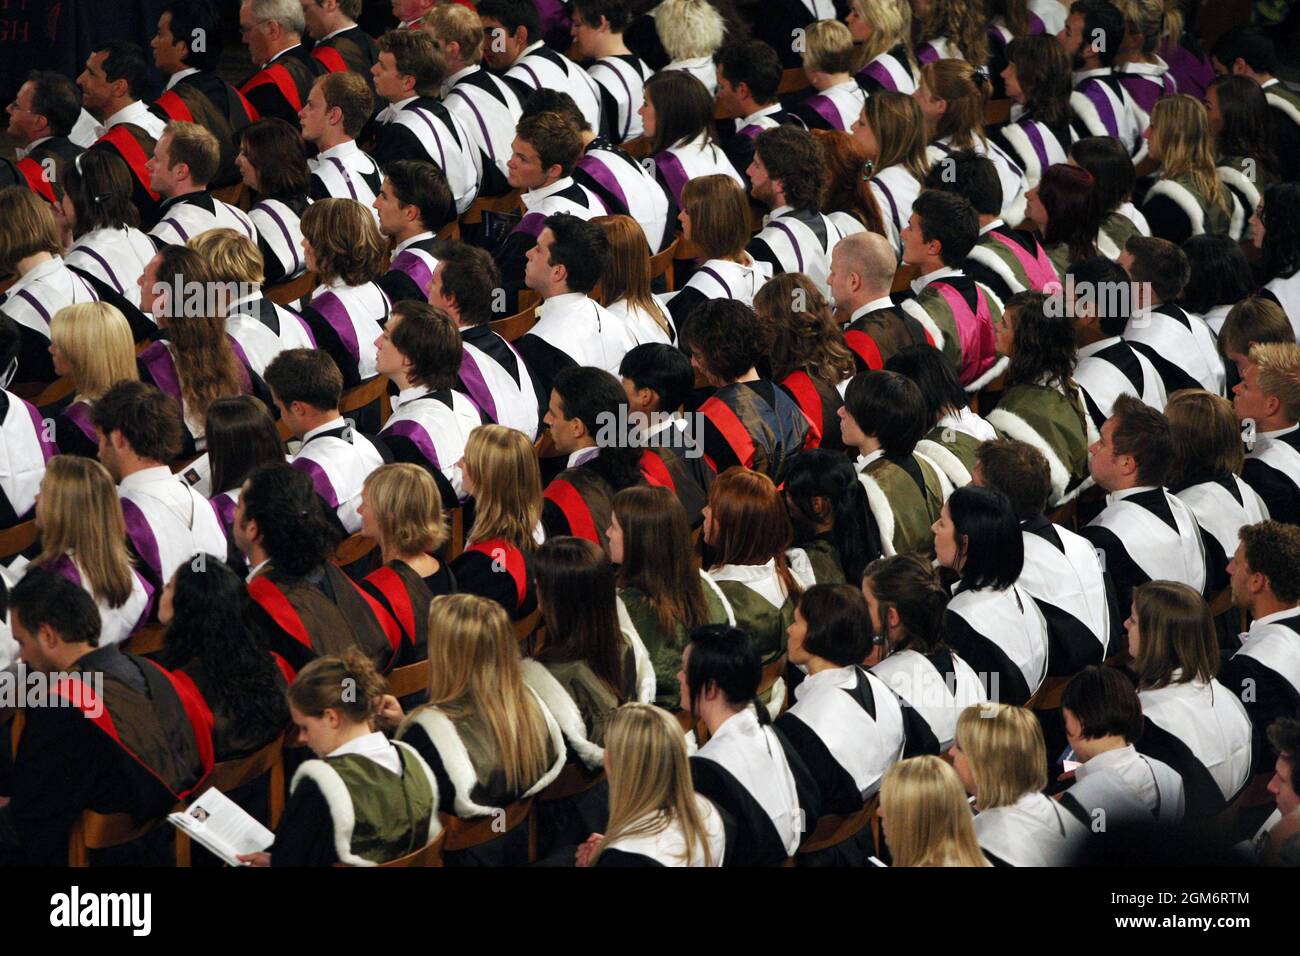 File photo dated 27/6/2008 of students at a University graduation ceremony. The North of England and coastal areas are experiencing a 'brain drain' of university graduates as many move to London and other cities with better labour market opportunities, a report suggests. Graduates are 10 percentage points more likely to have moved away from the area where they grew up than otherwise similar non-graduates by the age of 27, an Institute for Fiscal Studies (IFS) report says. Issue date: Friday September 17, 2021. Stock Photo